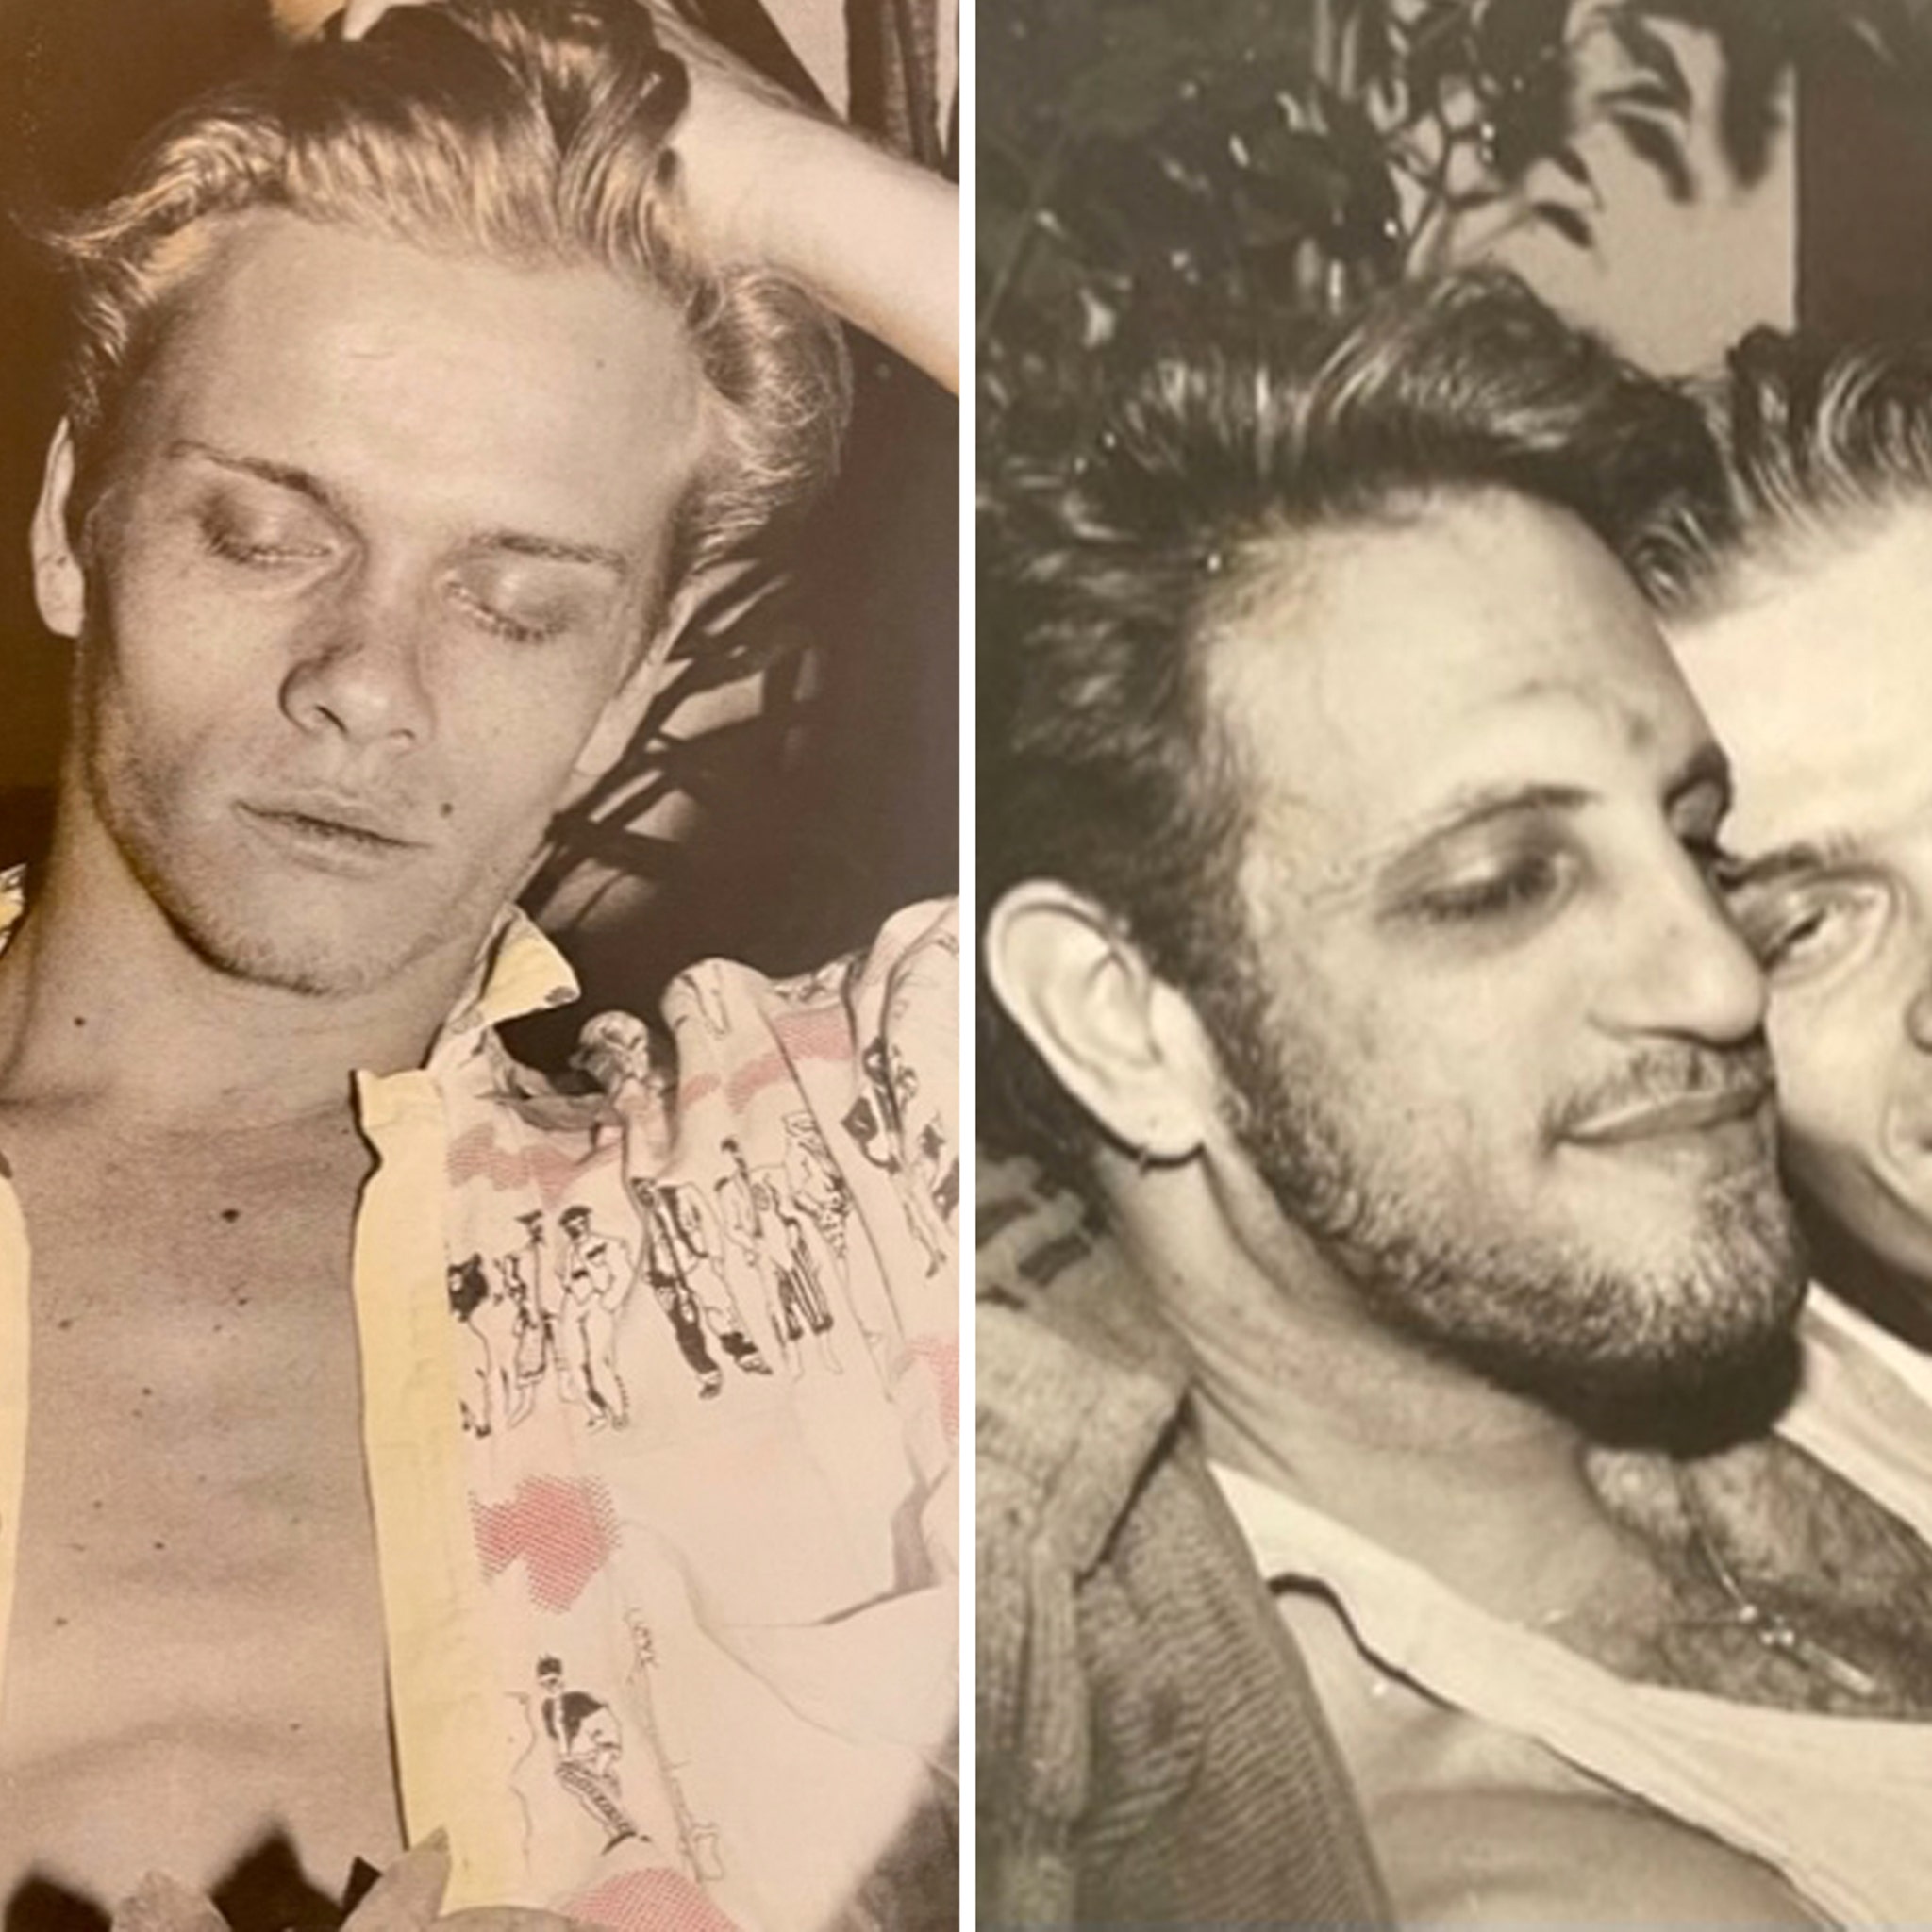 Gay Porn Star Billy Newtons Brutal Murder Solved Thanks to Amateur Sleuths 32 Years Later